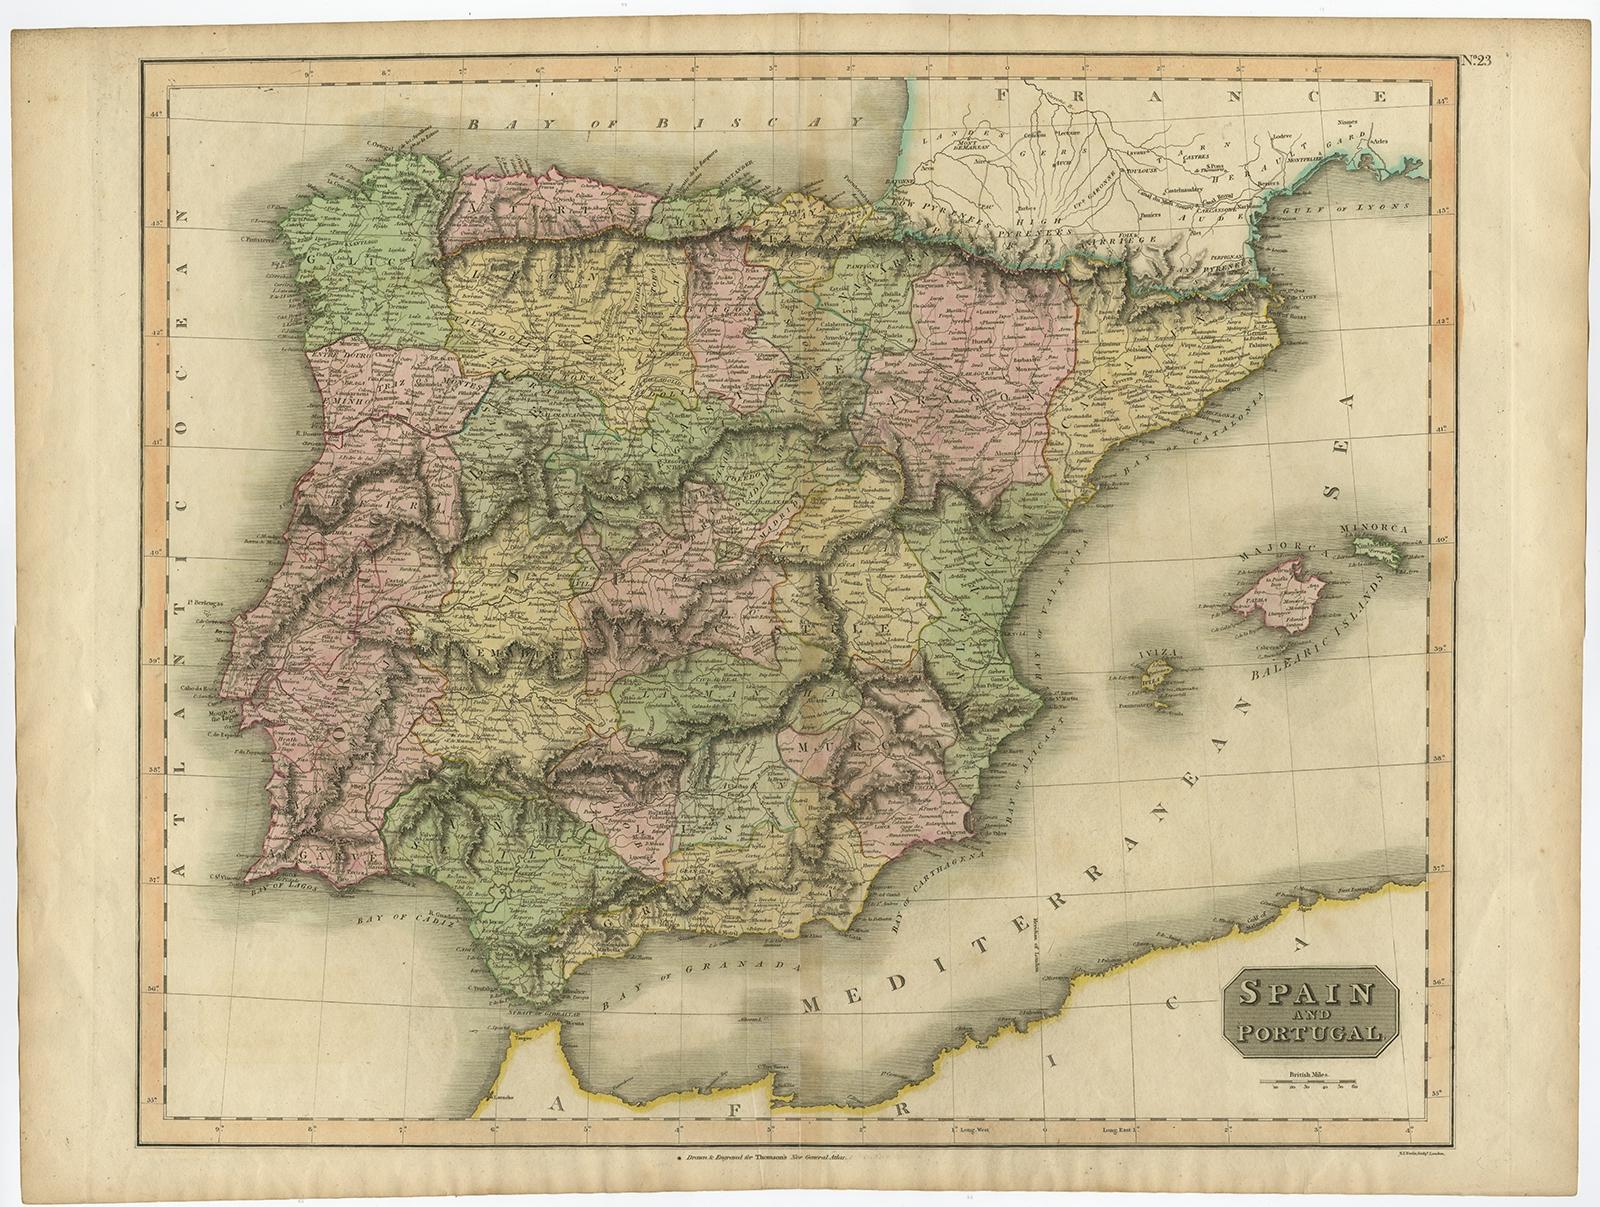 Antique map of Spain and Portugal. Thomson's map includes both countries in full, with Spain being divided into its various semi-autonomous provinces. The Balearic Island of Minorca, Majorca, and Ibiza are prominent in the left hand quadrants of the